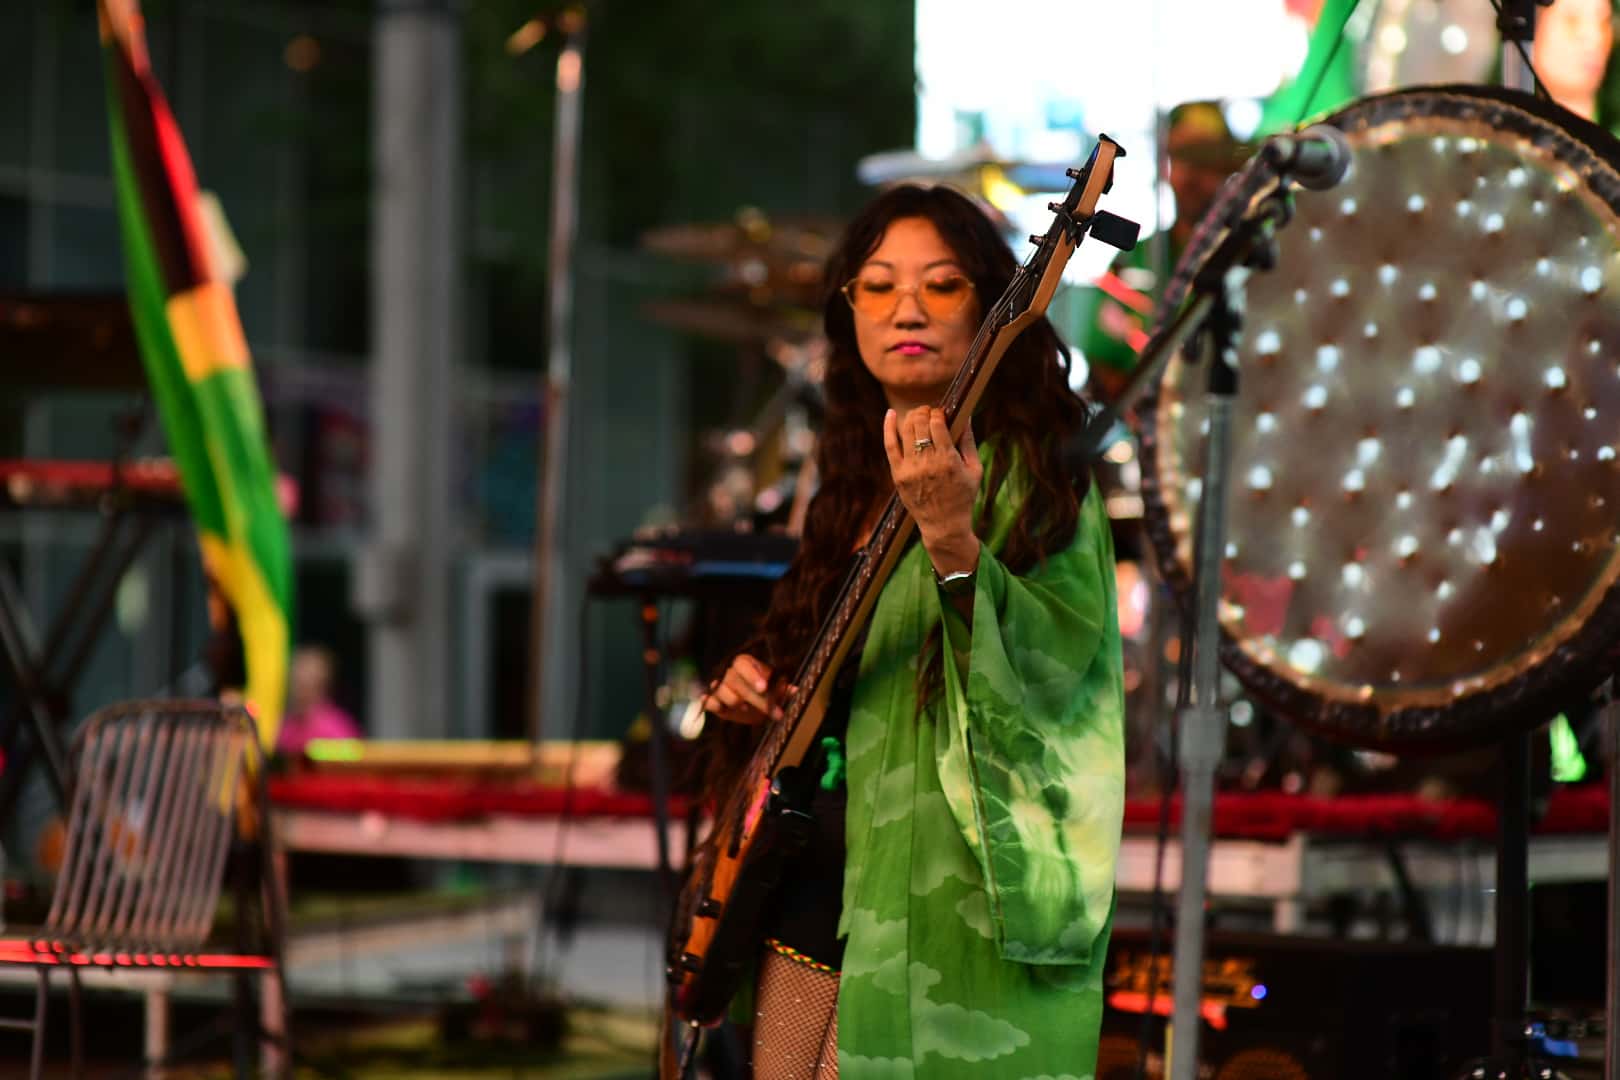 Sunami Force performs at UHD Thursday Night Concerts at Discovery Green. Photo by Jamaal Ellis.